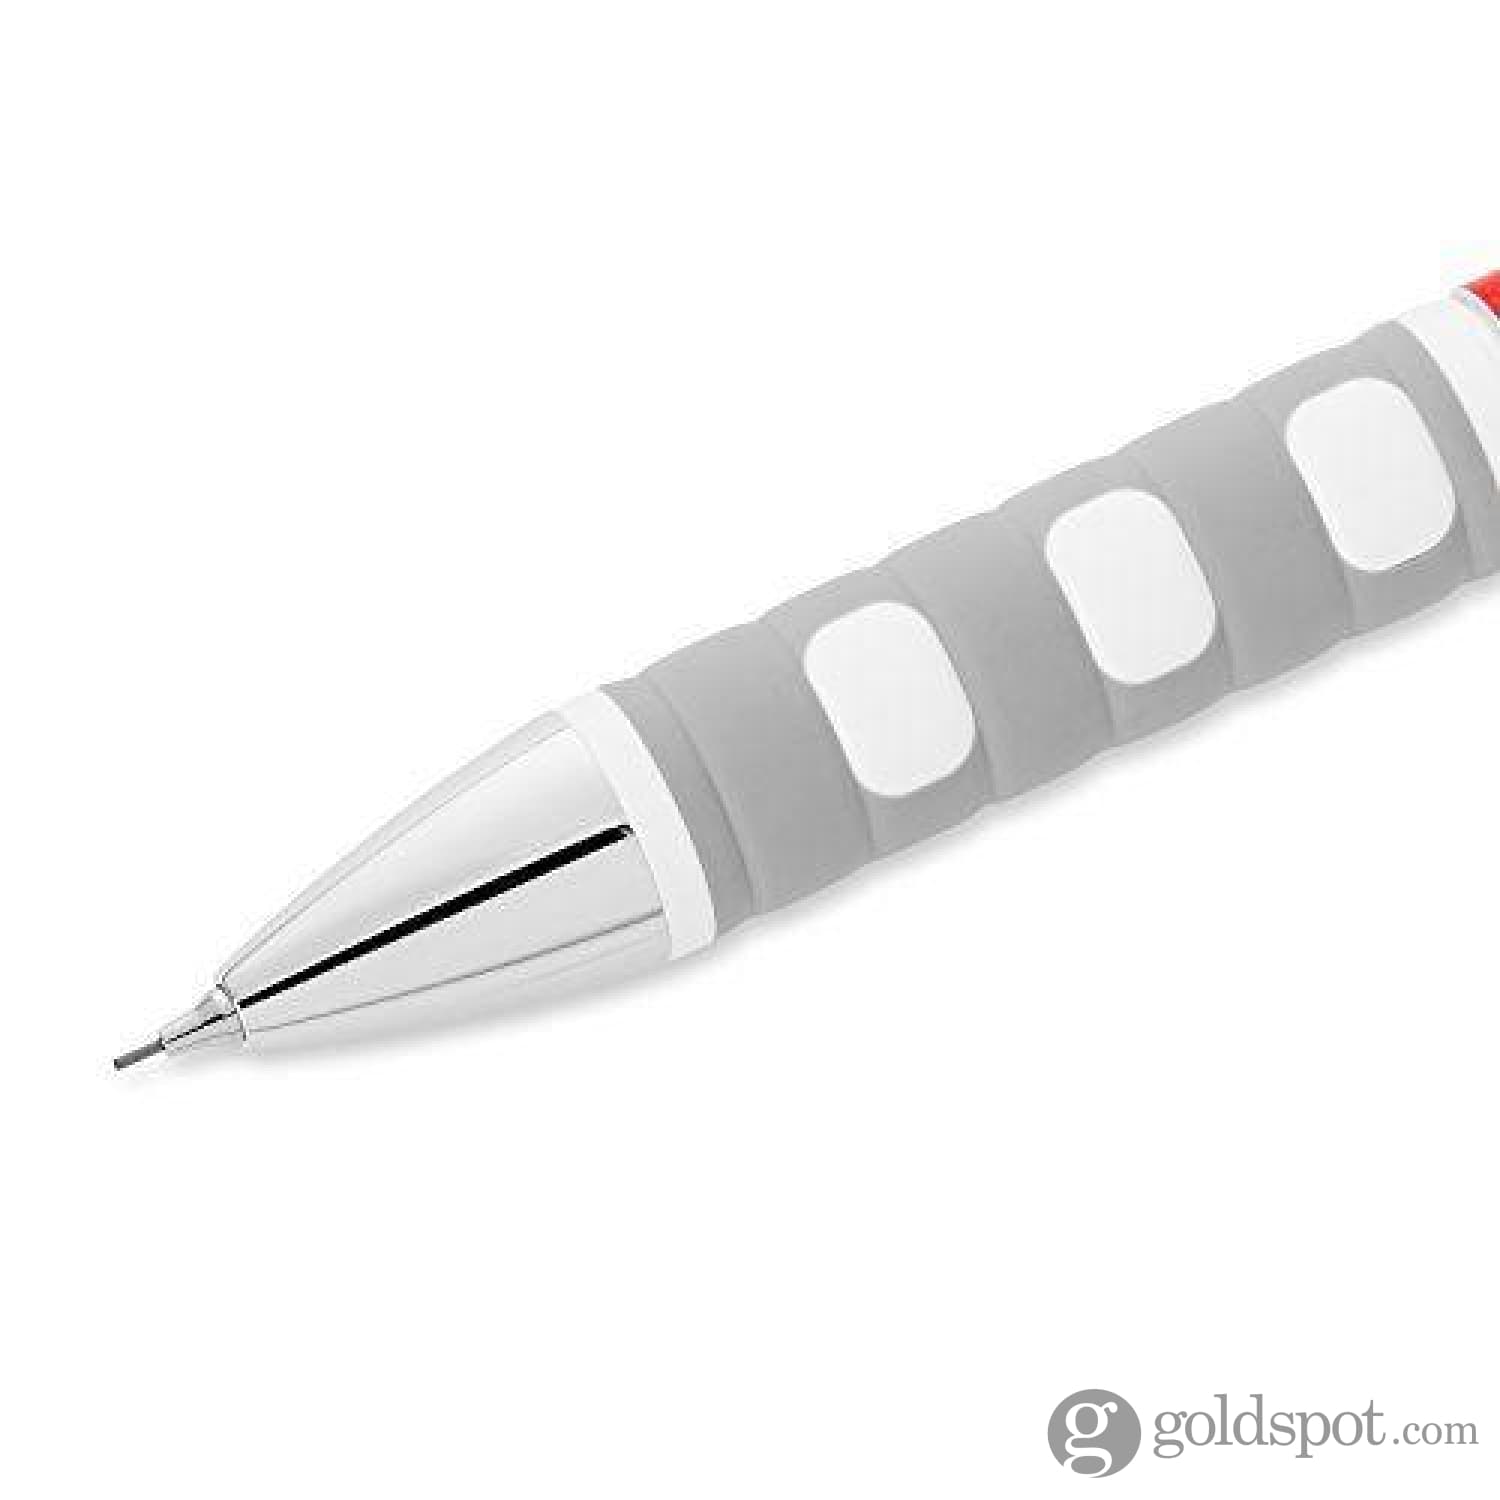 Rotring Mechanical Pencil Tikky, White, 0.5mm (S0770530)